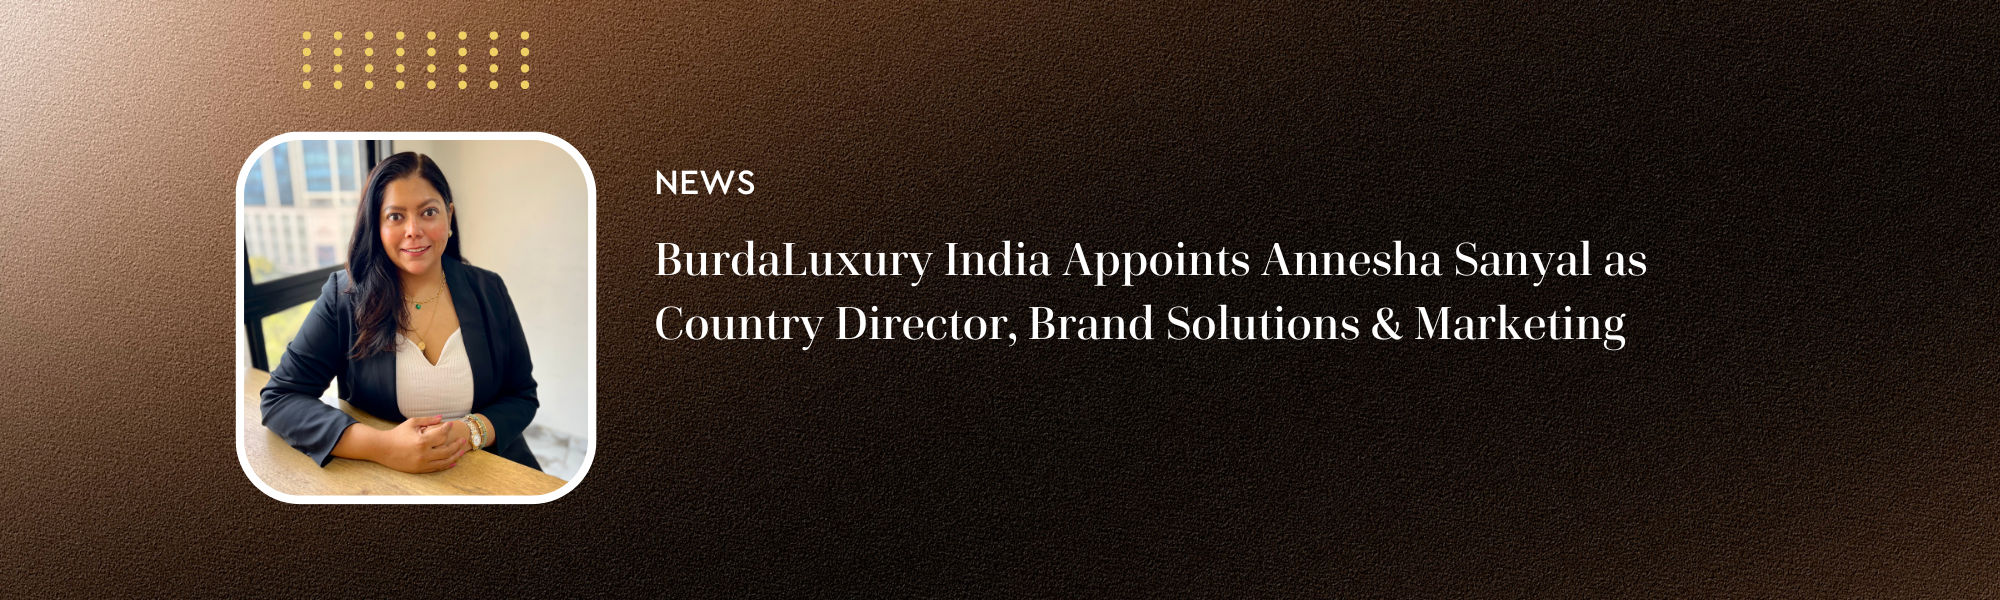 BurdaLuxury India Appoints Annesha Sanyal as Country Director, Brand Solutions & Marketing